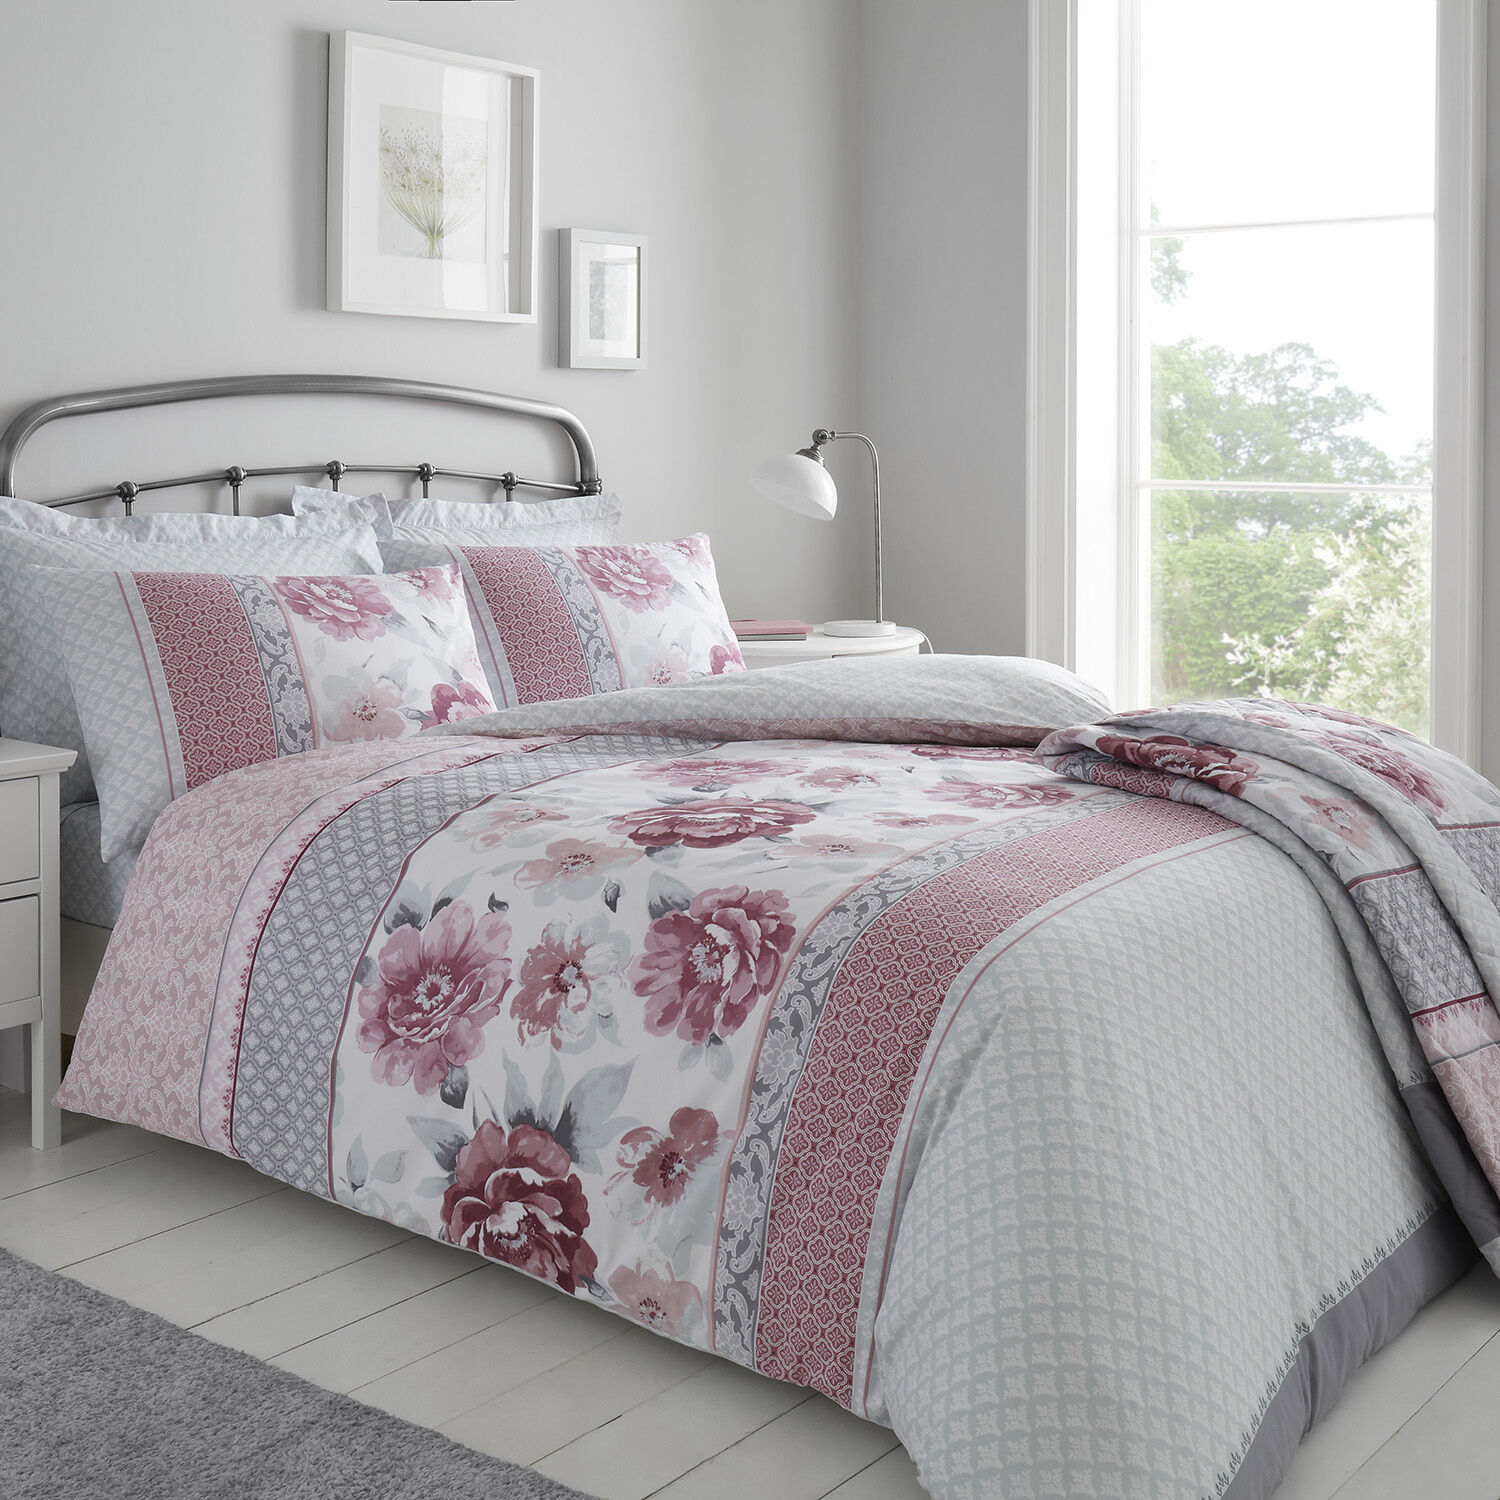 Ophelia Bed Linen Home More, Grey And Pink Super King Bedding